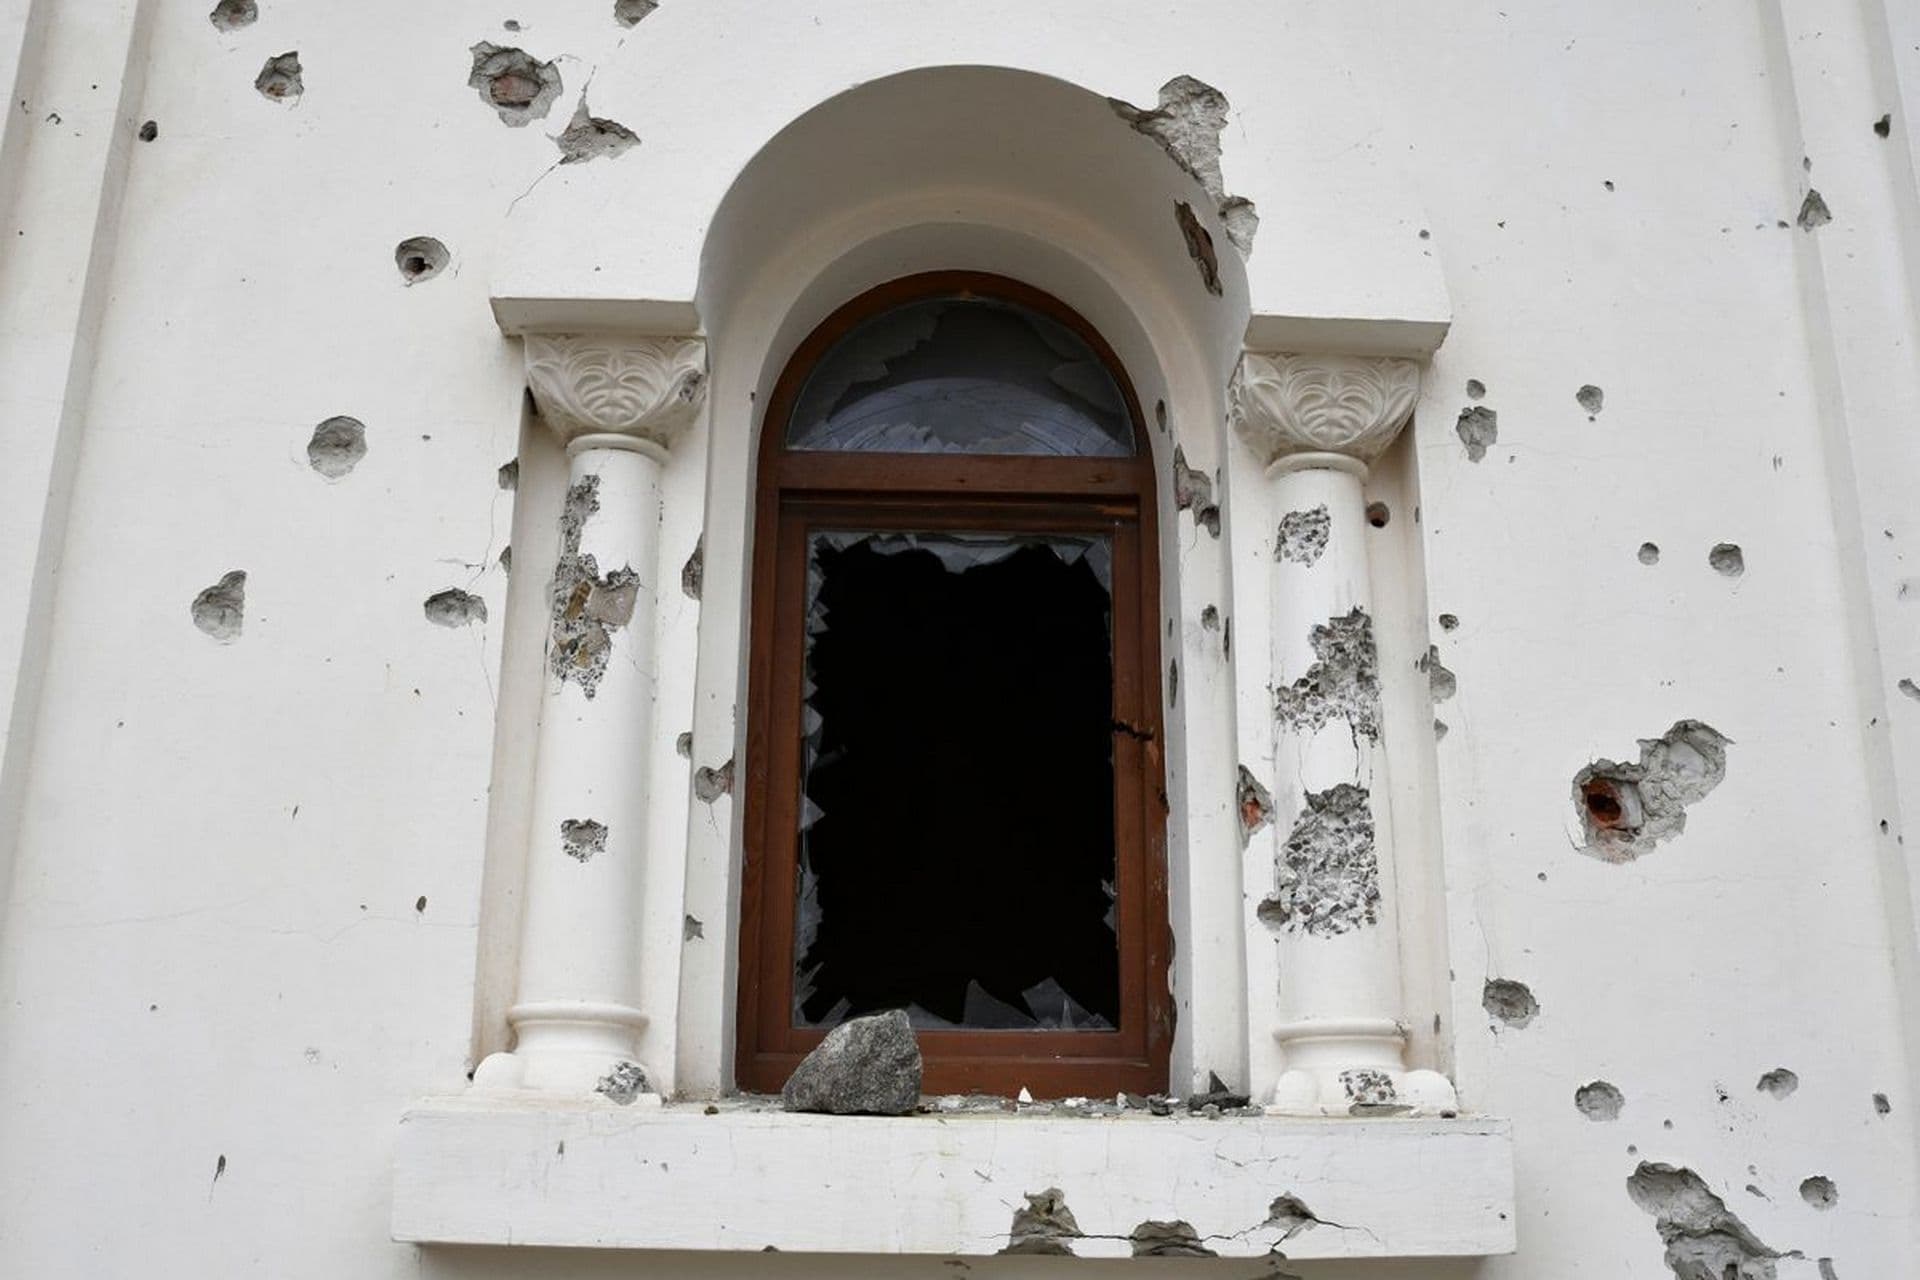 Shrapnel holes around a broken window of the St. George's Skete in the village of Dolyna